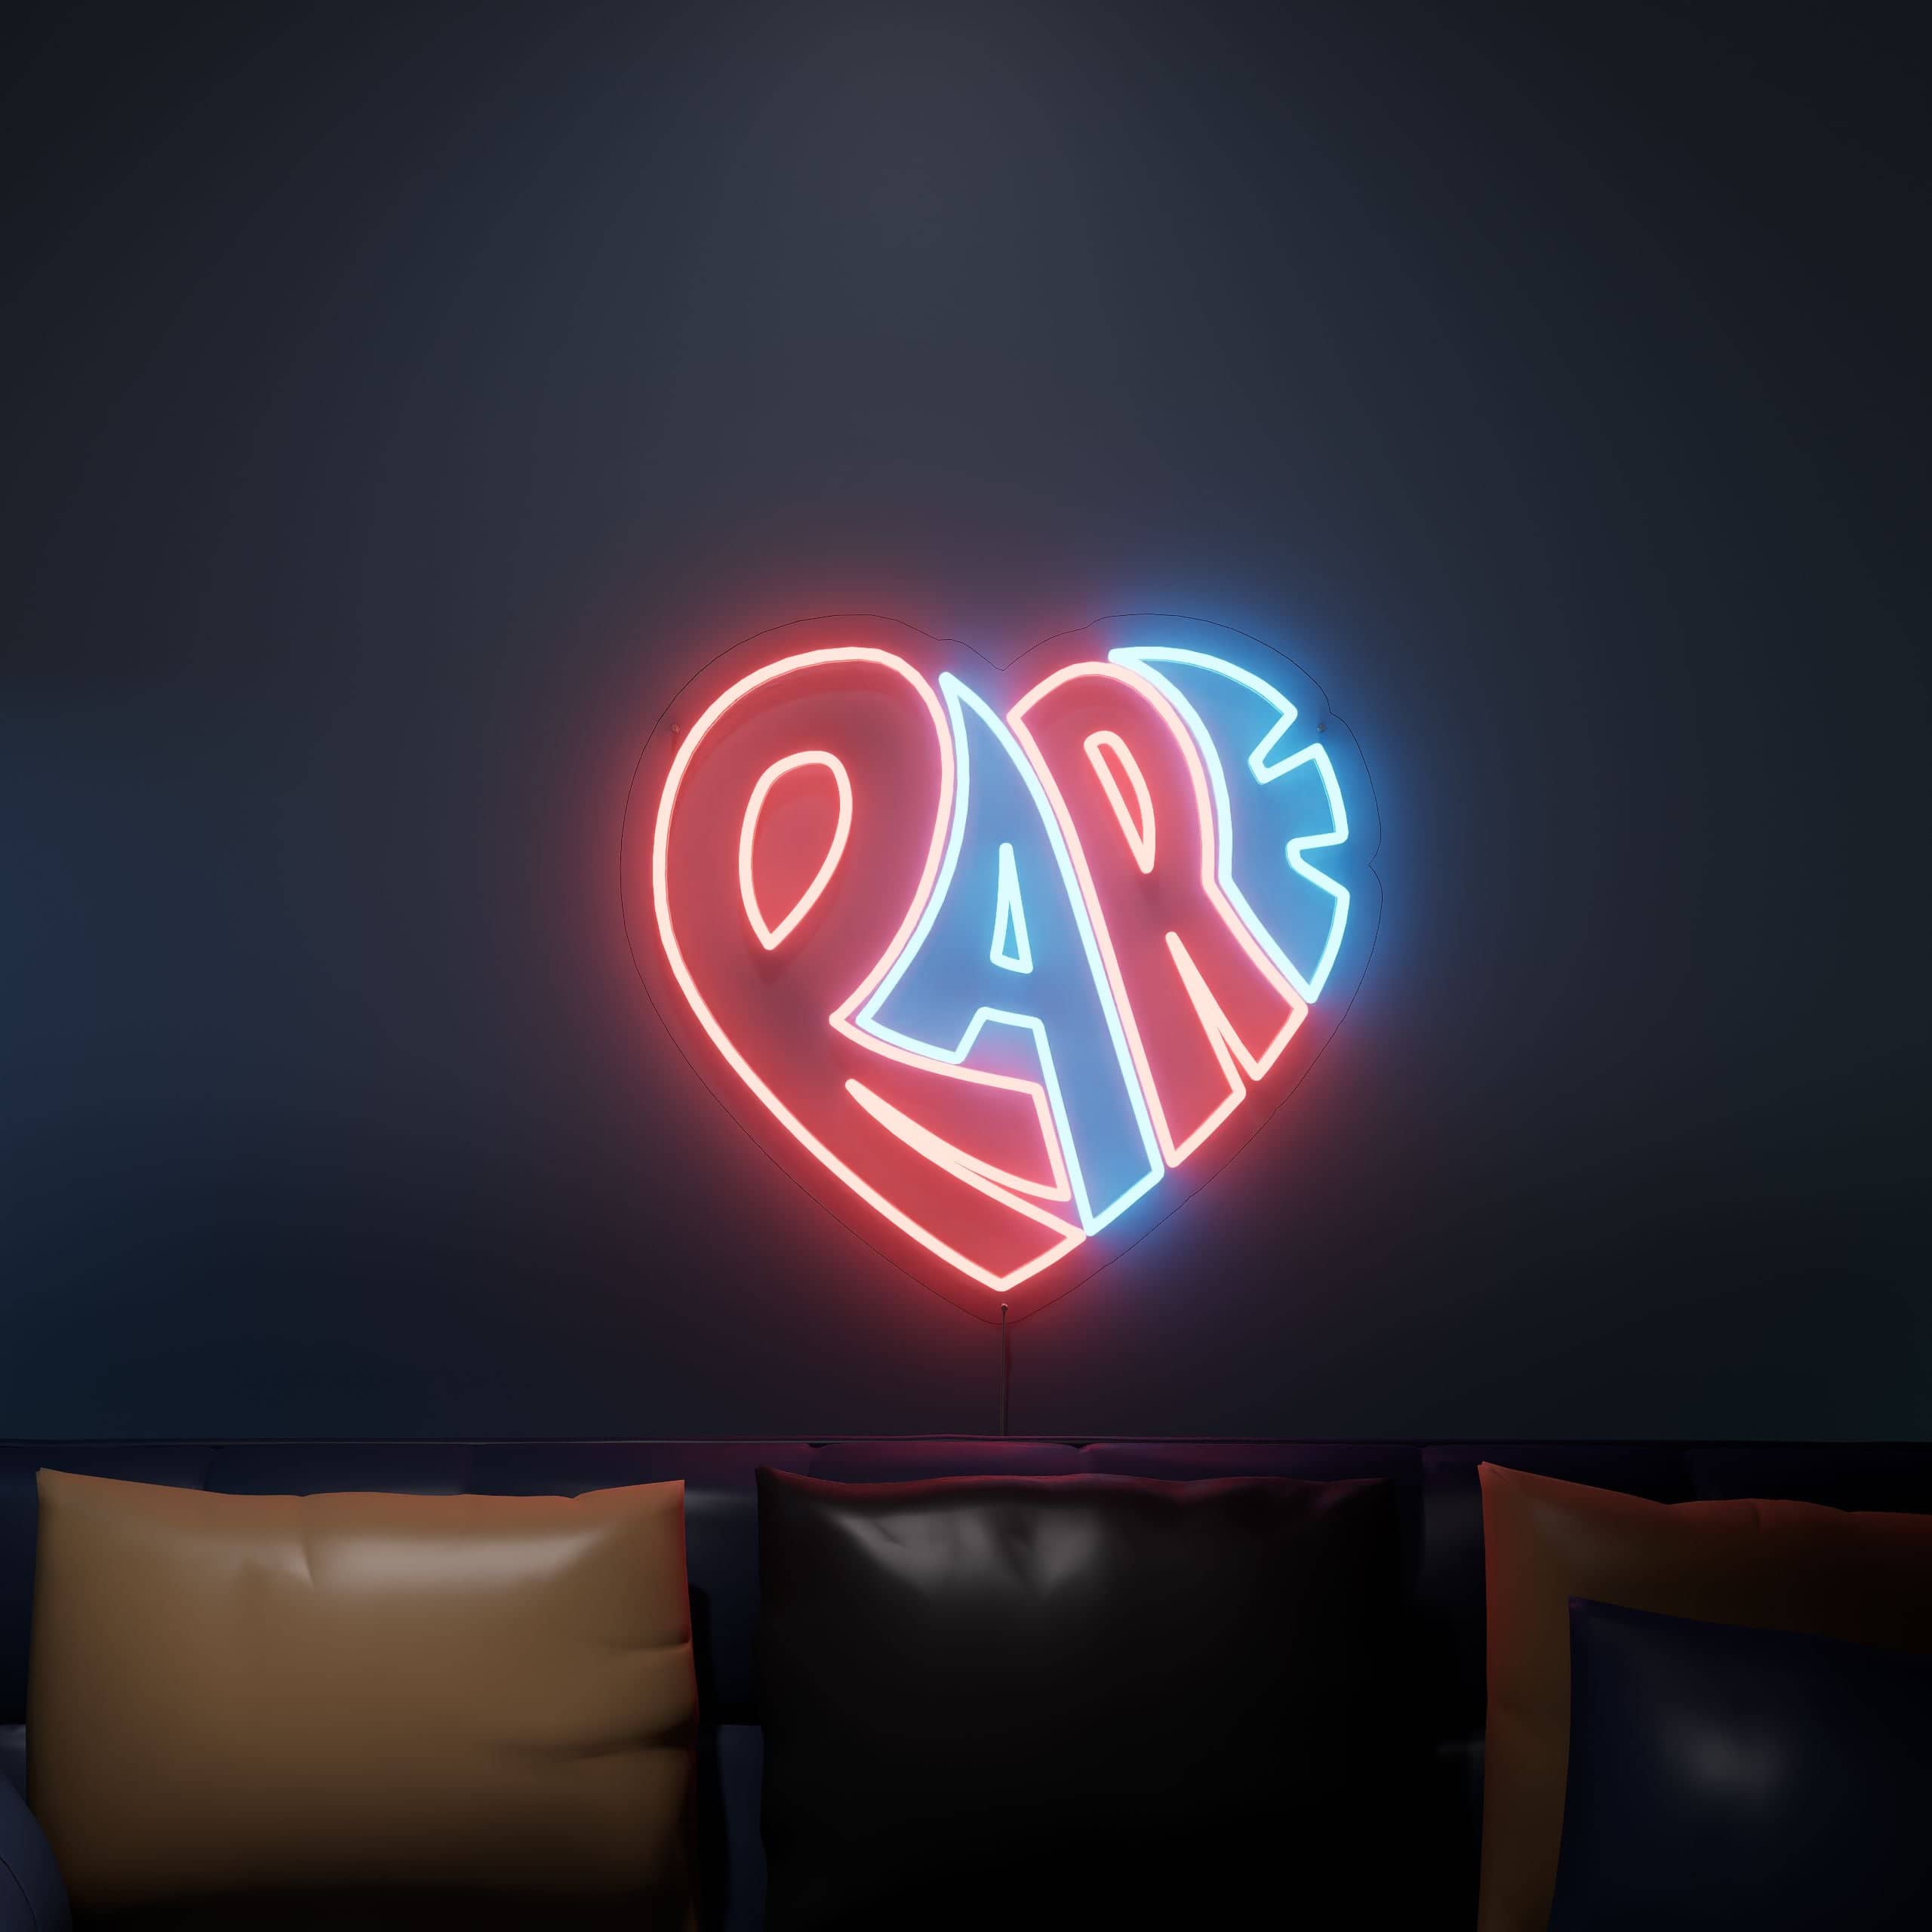 Add warmth with Rare Love Neon Sign in your space